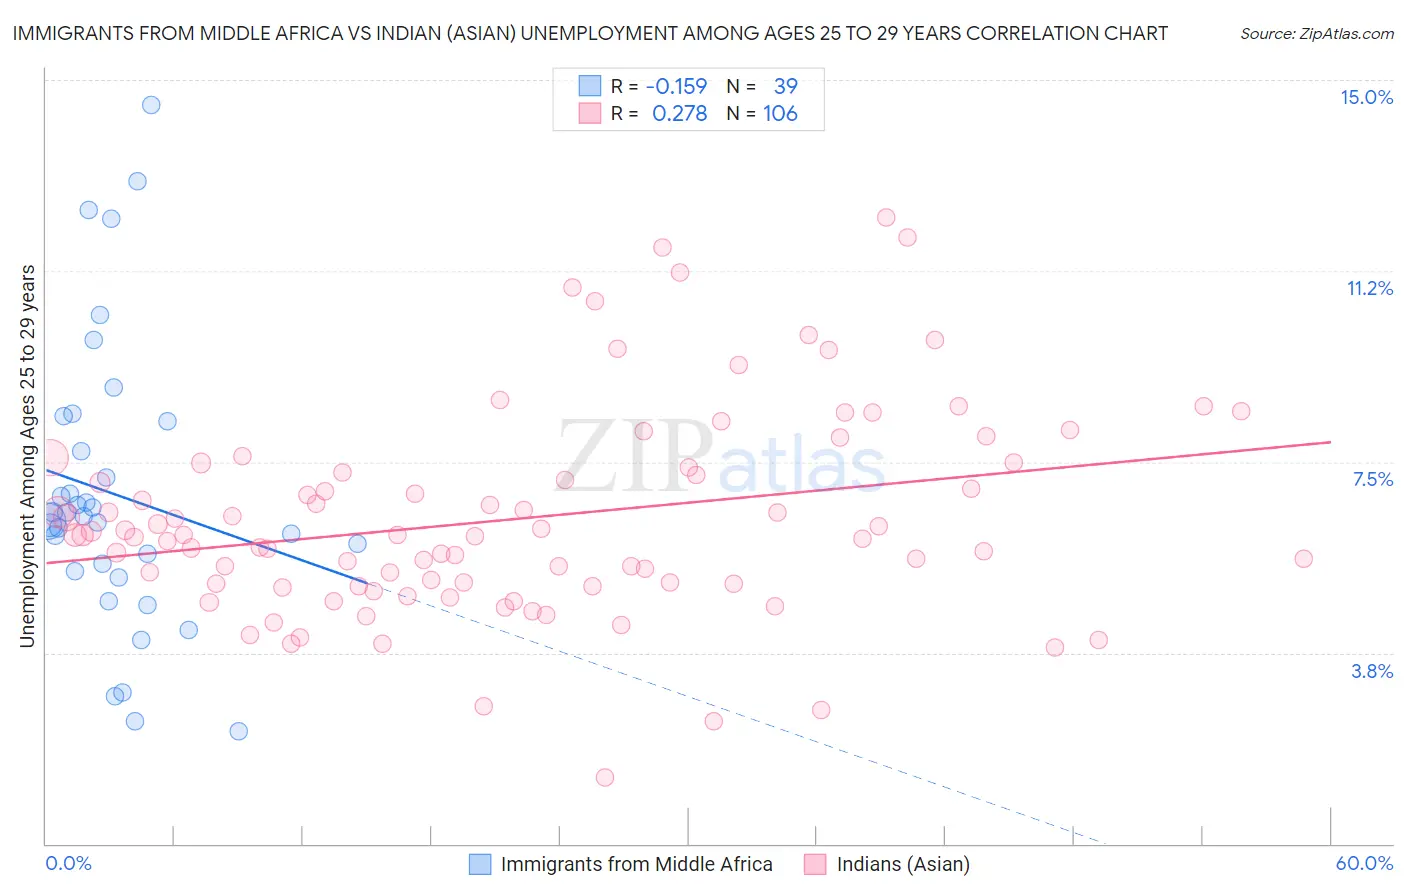 Immigrants from Middle Africa vs Indian (Asian) Unemployment Among Ages 25 to 29 years